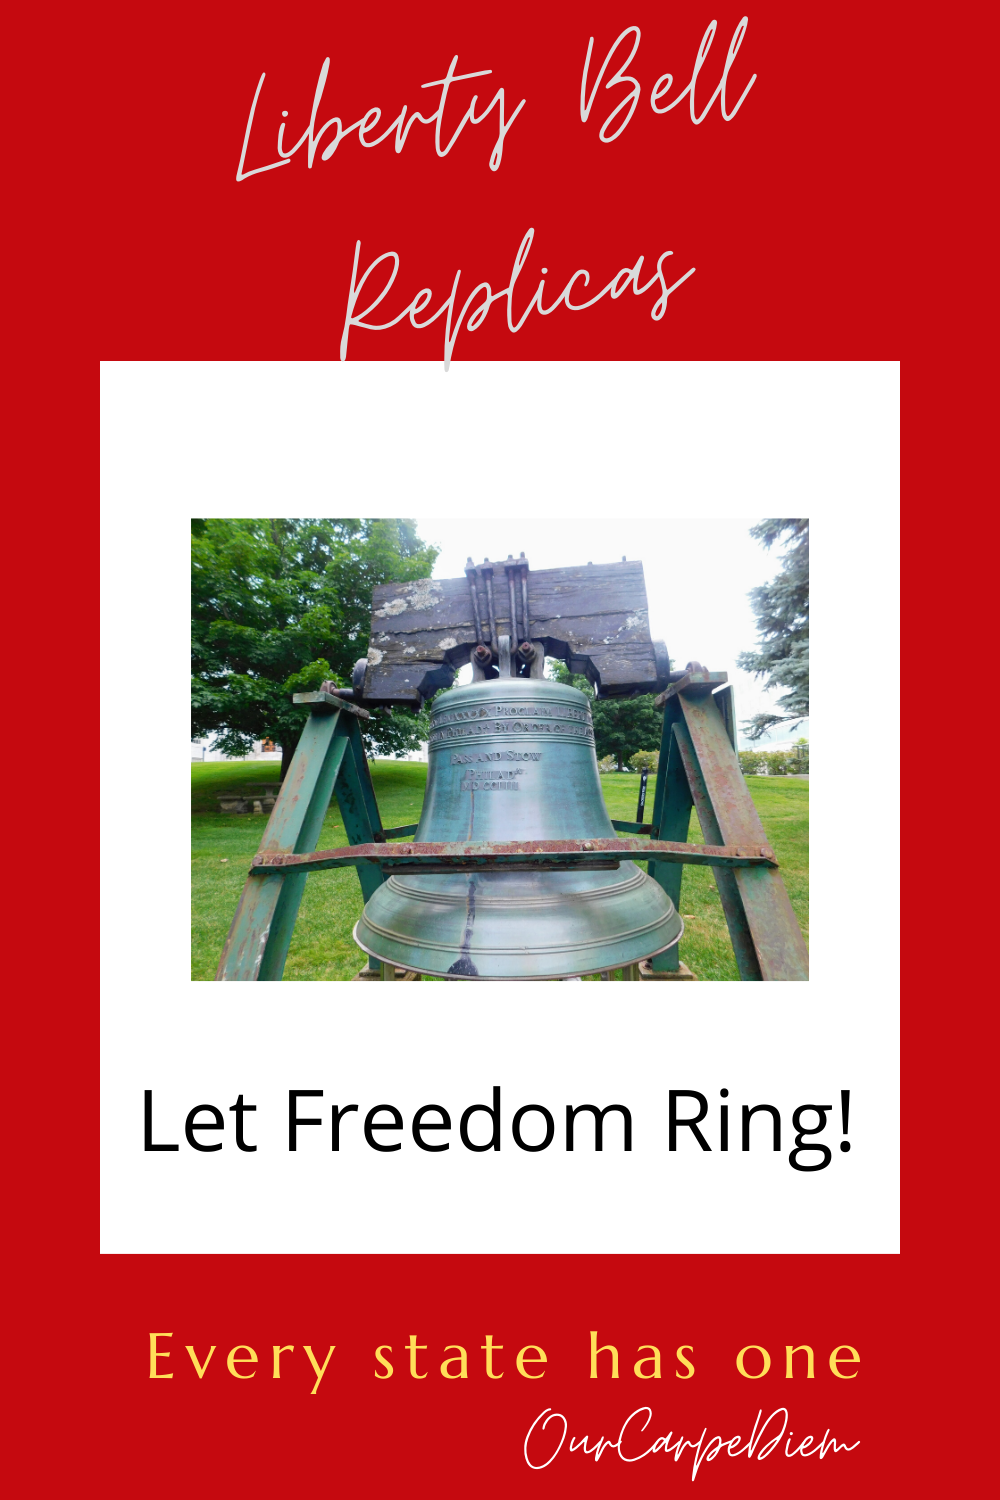 Did you know every state has a full-sized replica of the #LibertyBell ? Read the story behind these copy-cat bells and about our #quest to visit them all. Usually they are at the #StateCapitol or #StateHouse but of course there are exceptions. Of course it would be hard to visit them during our pandemic, but we can dream about #LifeAfterCovid and make a new #travel #bucketlist. Read all about Savings Bond Drive that inspired these liberty bell replicas. #OurCarpeDiem #TravelGuide #USAtravel #NationalHistory